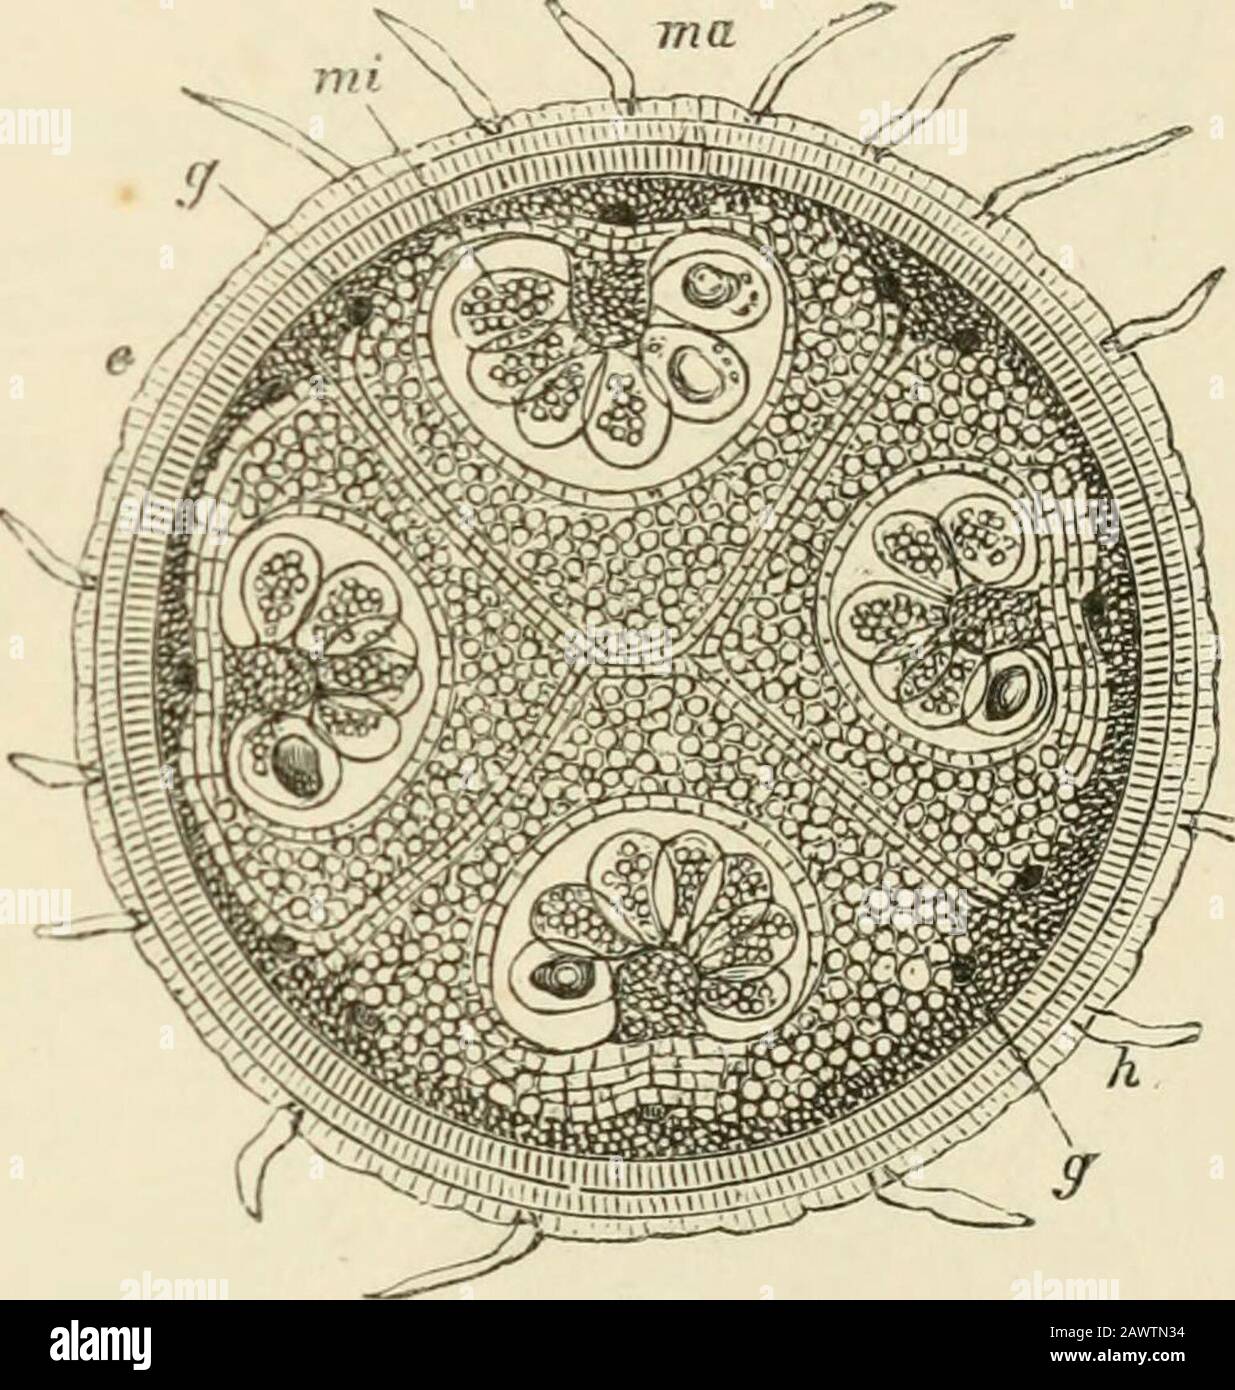 Text-book of botany, morphological and physiological . capsule increases, thecentral cell first divides into two, and then, by successive bipartitions, into eightspore-mother-cells, which become isolated in the cavity of the sporangium which isfilled with granular fluid, and assume a round form. The inner parietal layerremains in the condition of a delicate epithelium till the time of the formation ofthe spores, but disappears when they are ripe; so that here also the wall of thesporangium finally consists of only one layer. In Marsilea and Pilularia, where theenvelope of the sporocarp is very Stock Photo